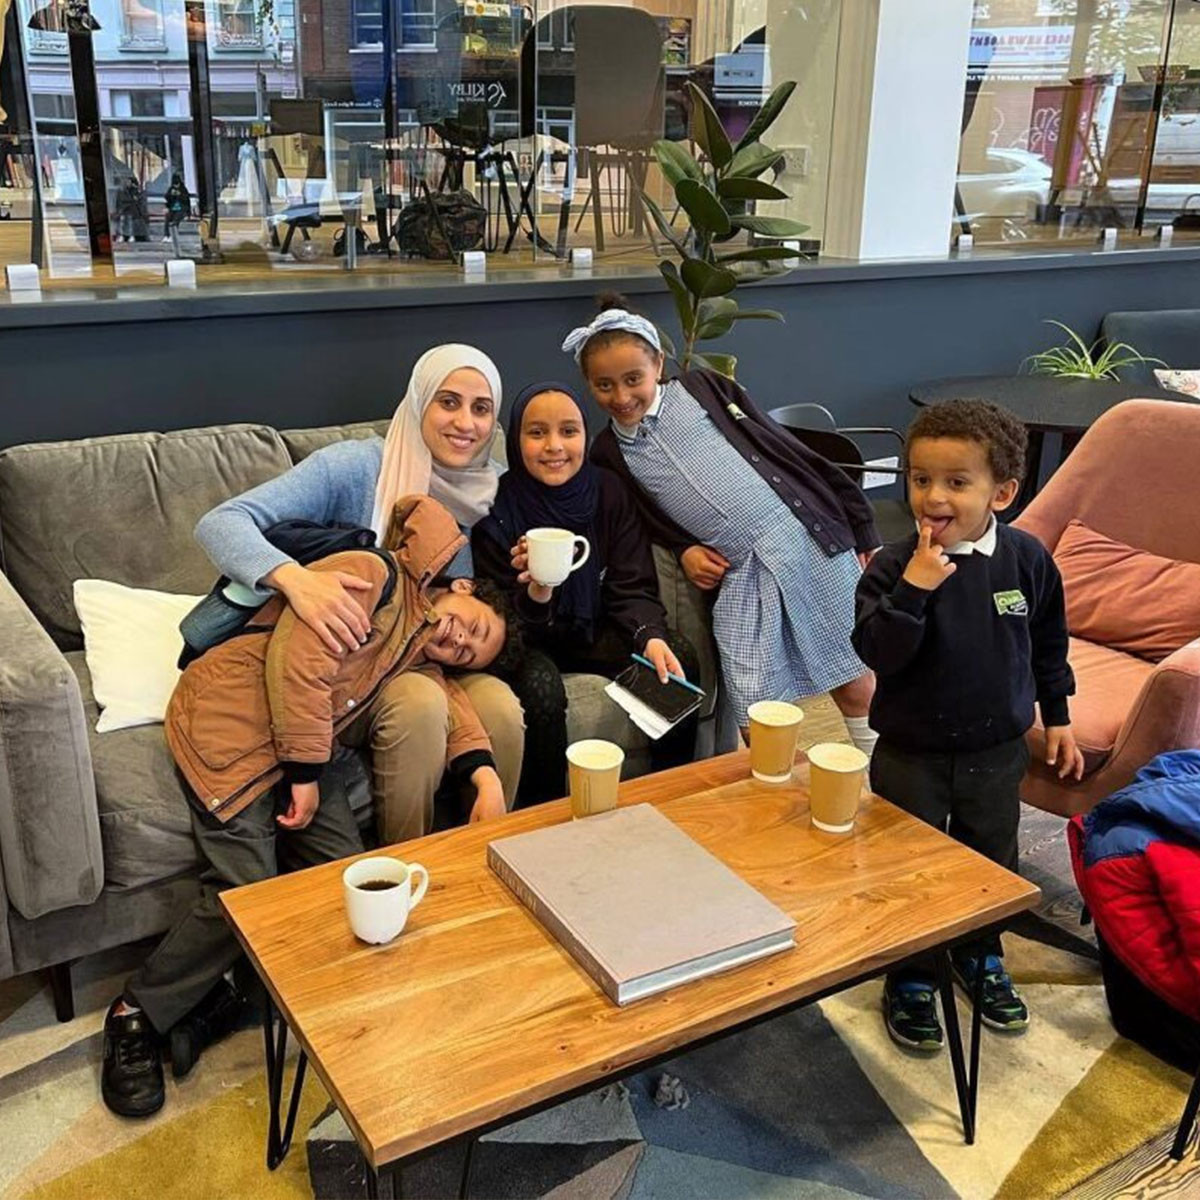 Parent with four children in a cafe